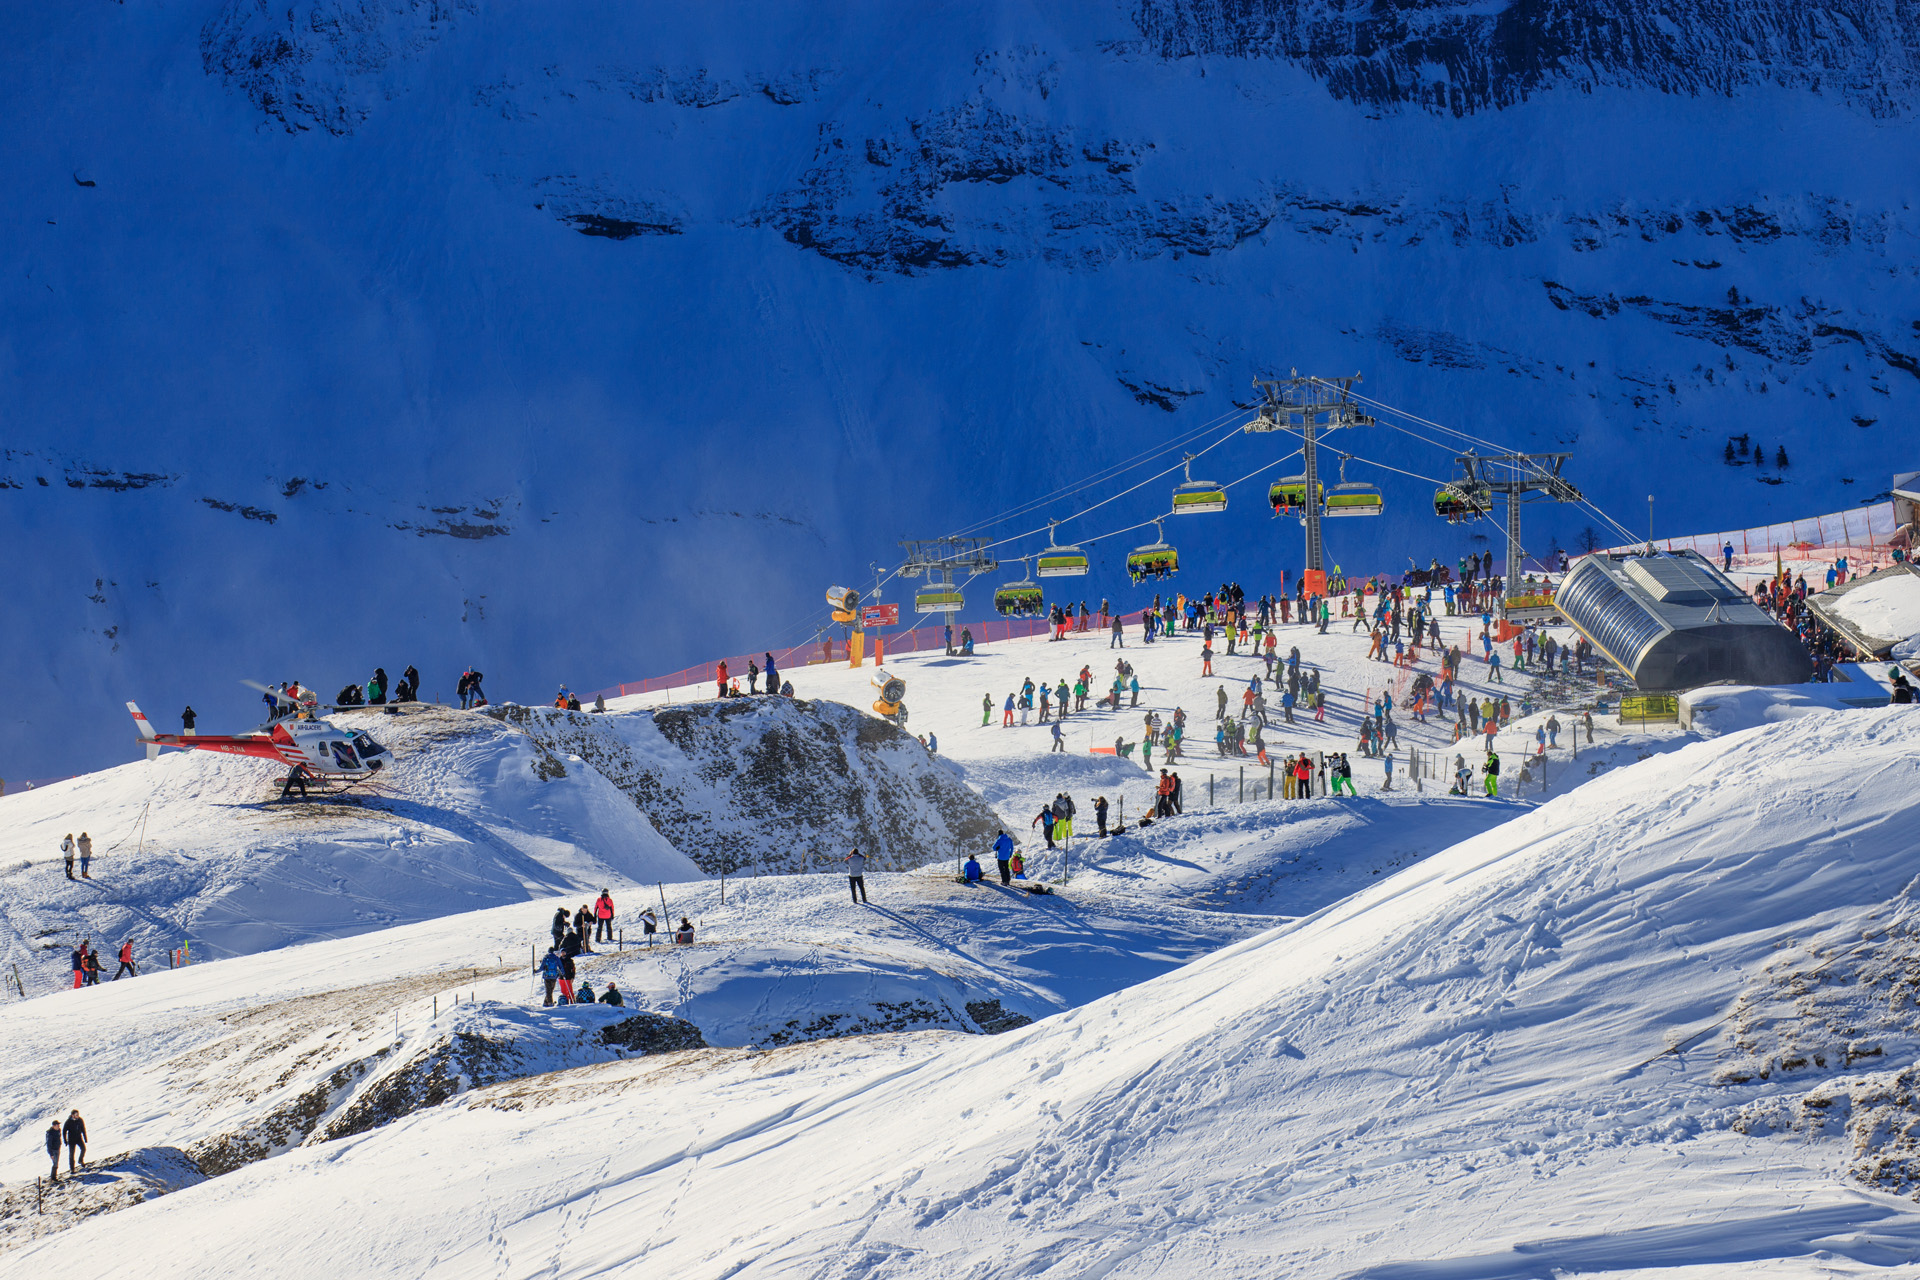 View of the ski resort Jungfrau Wengen with snow, cable cars and skiers